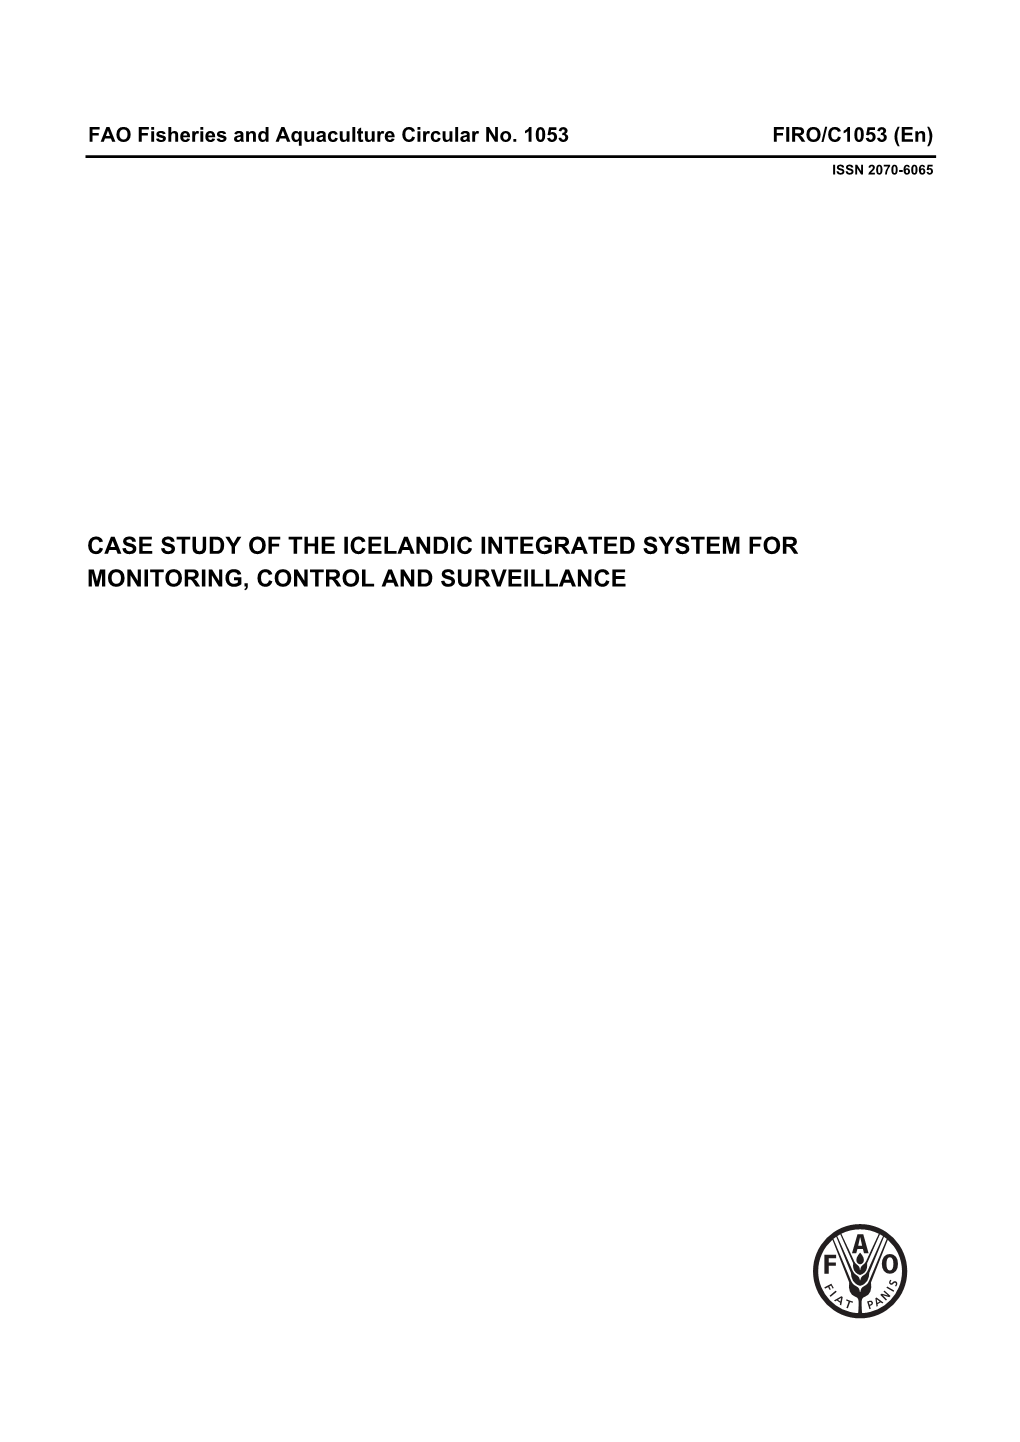 Case Study of the Icelandic Integrated System for Monitoring, Control and Surveillance